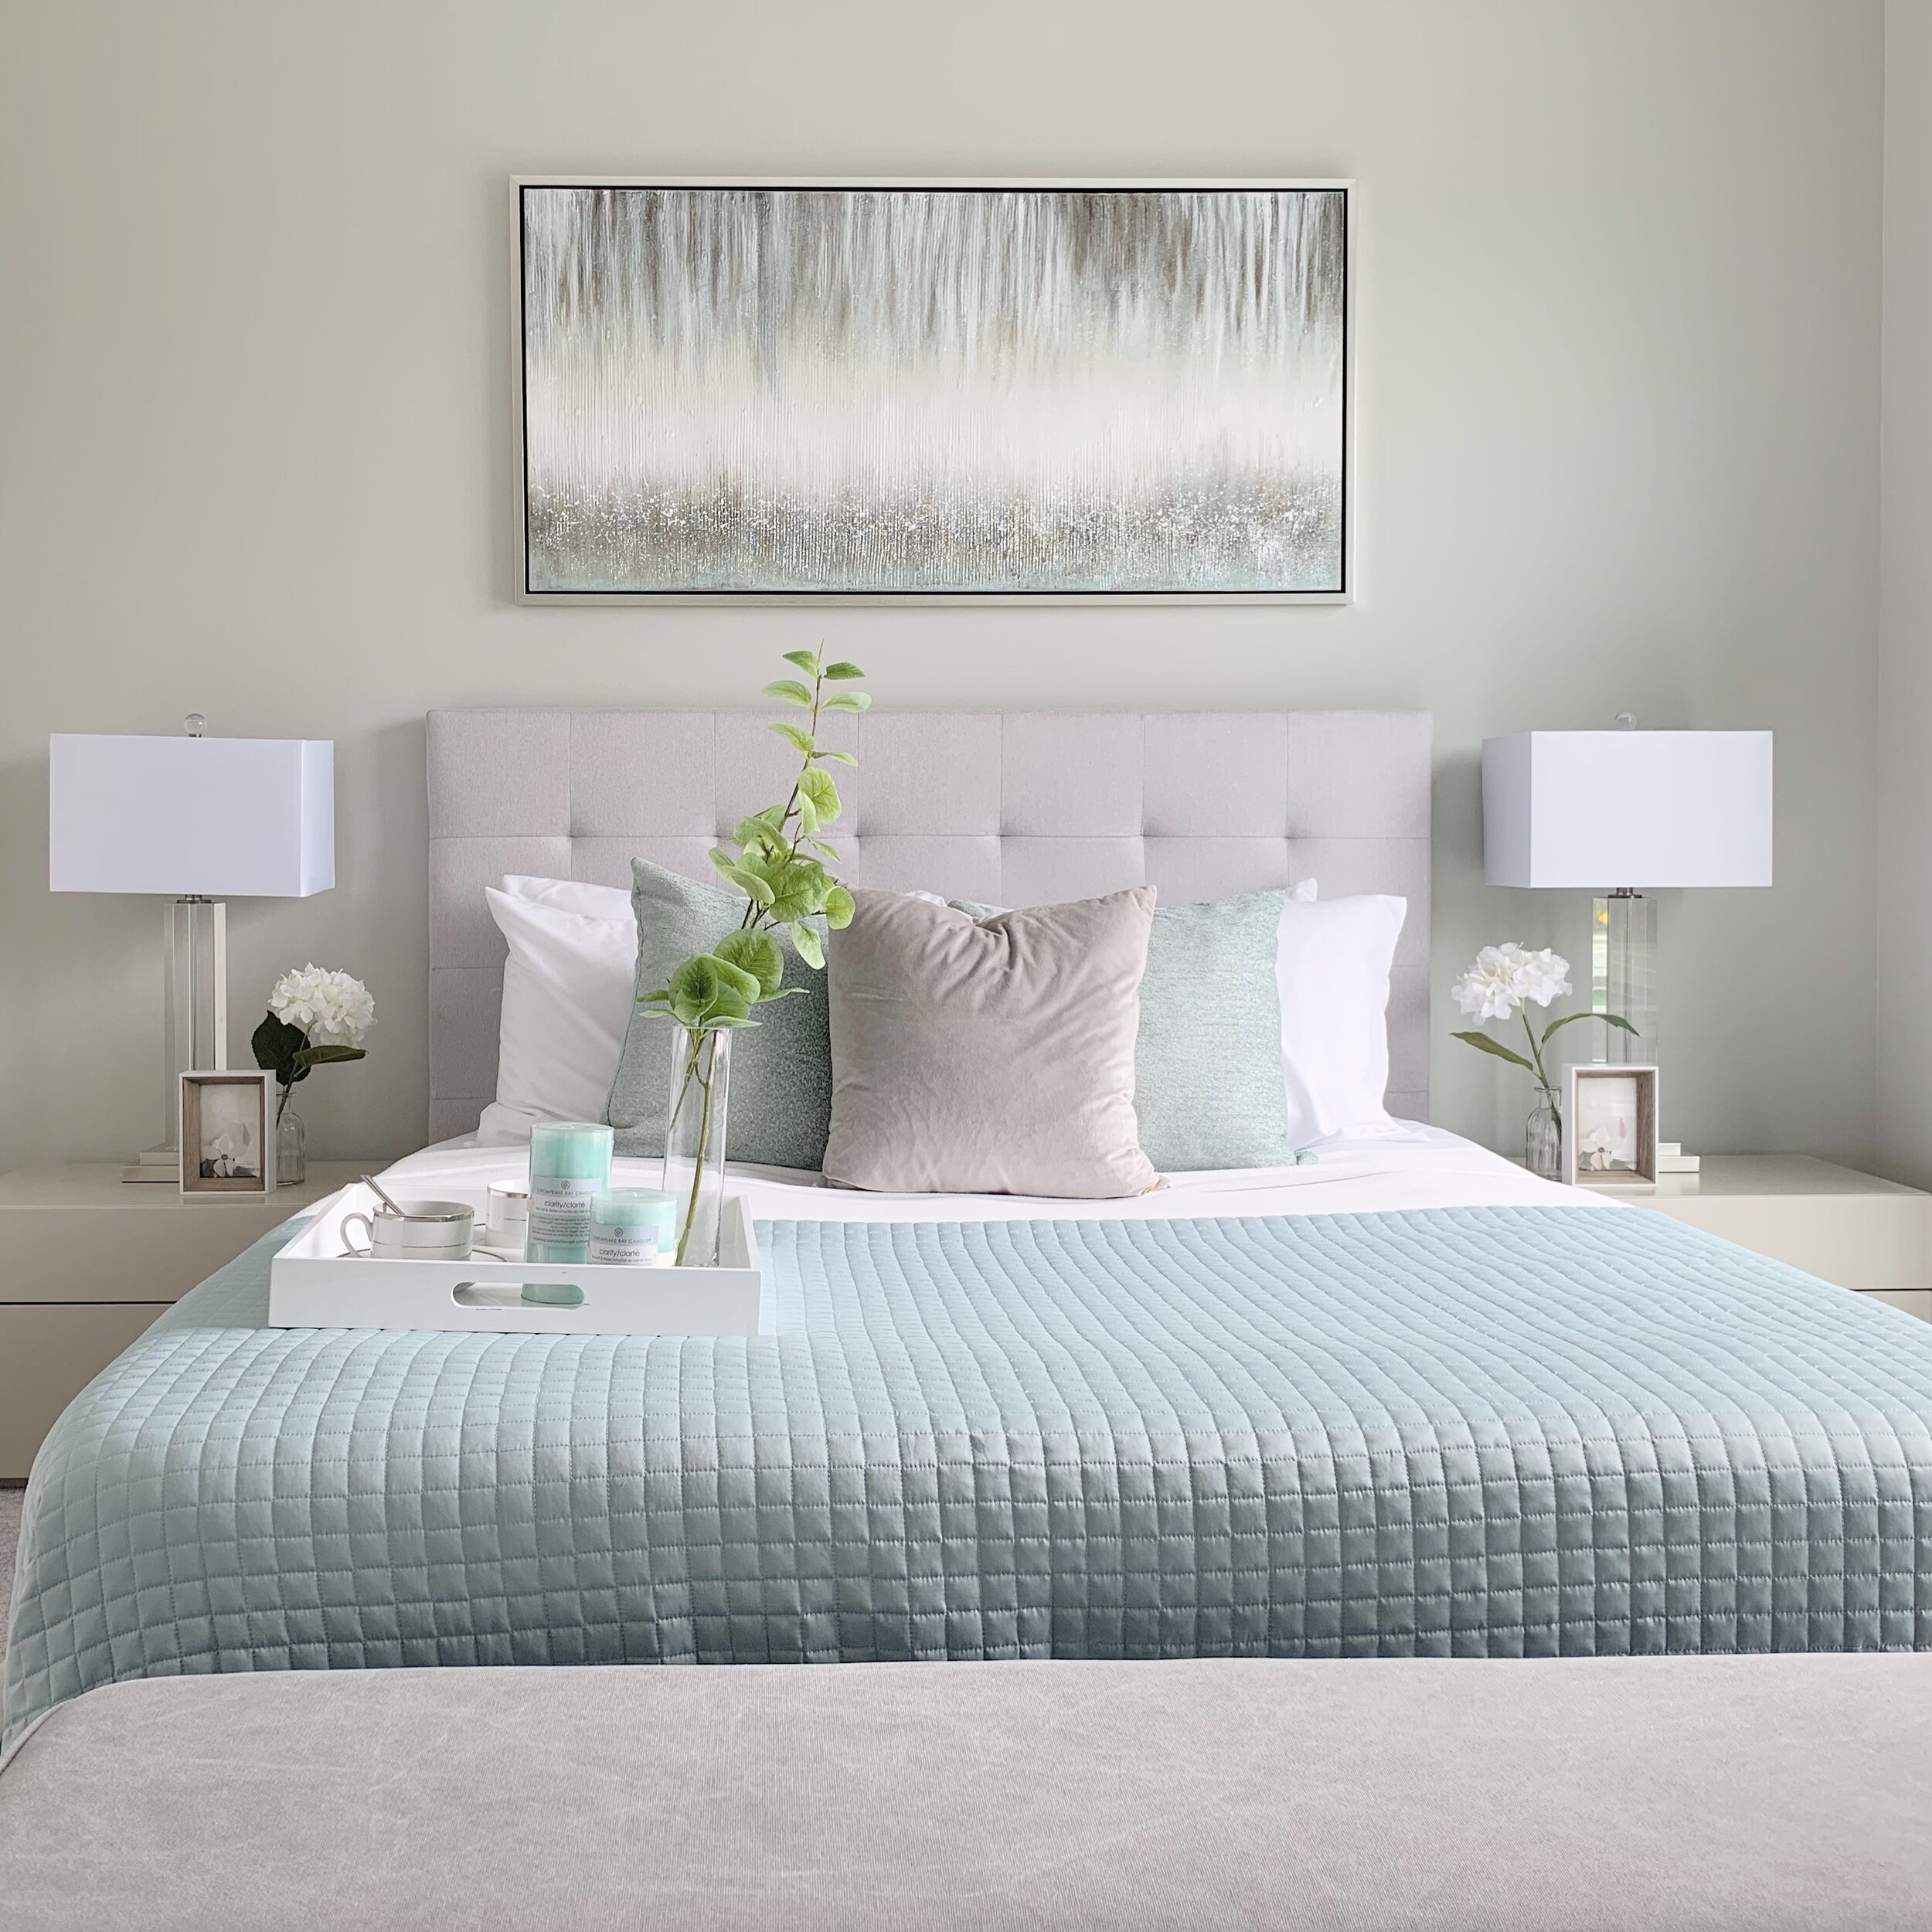 This bedroom we staged instantly feels clean and updated with a fresh coat of neutral paint.